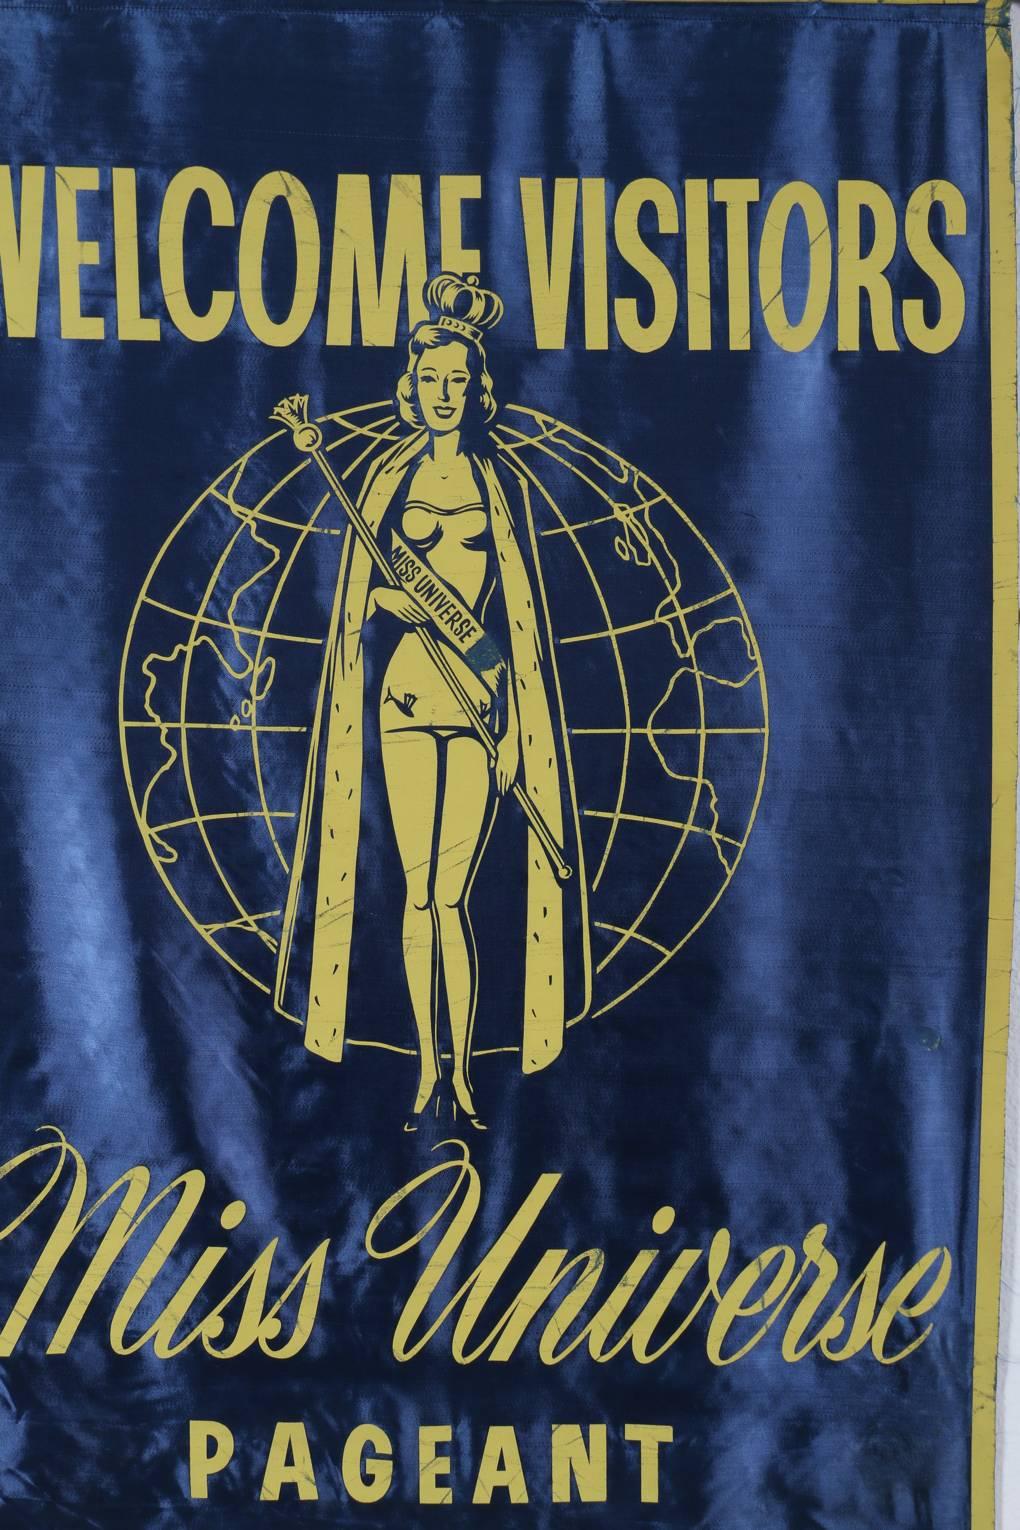 Miss Universe Pageant Welcome Banner from the first 1952 Miss Universe Pageant which took place in Long Beach, California. A classic piece of American popular culture and an iconic wall hanging display. This banner measures 45 inches high x 29.5